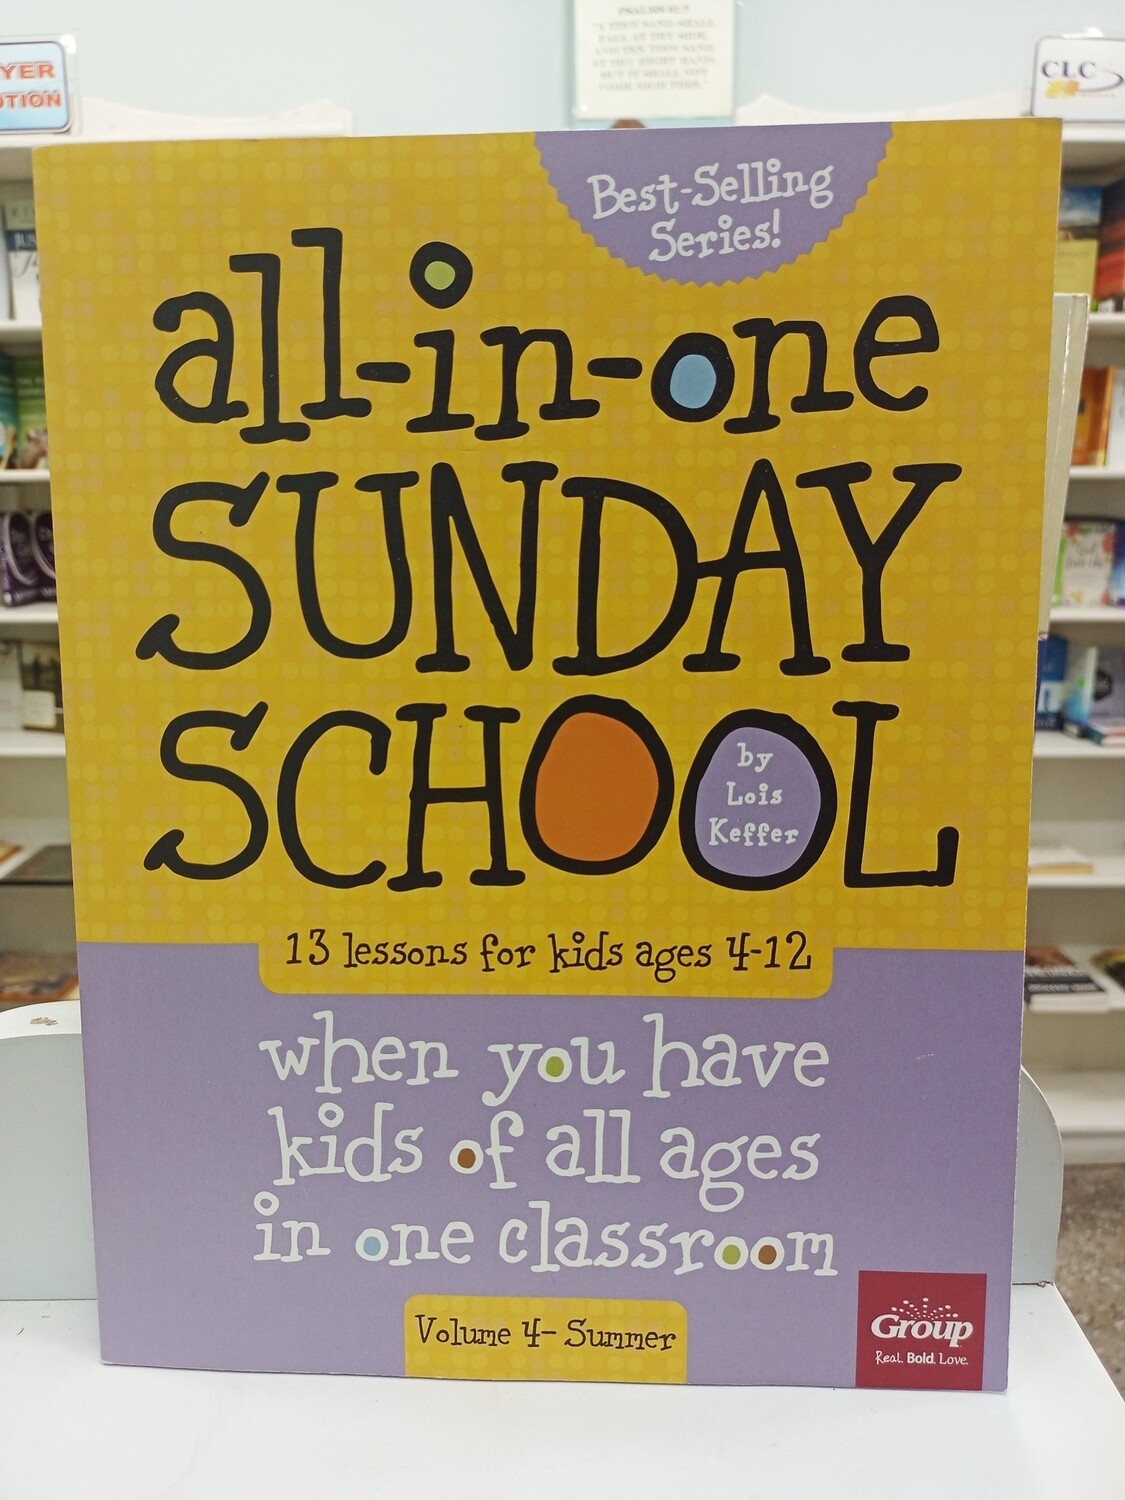 All in one Sunday School - Text Book Series